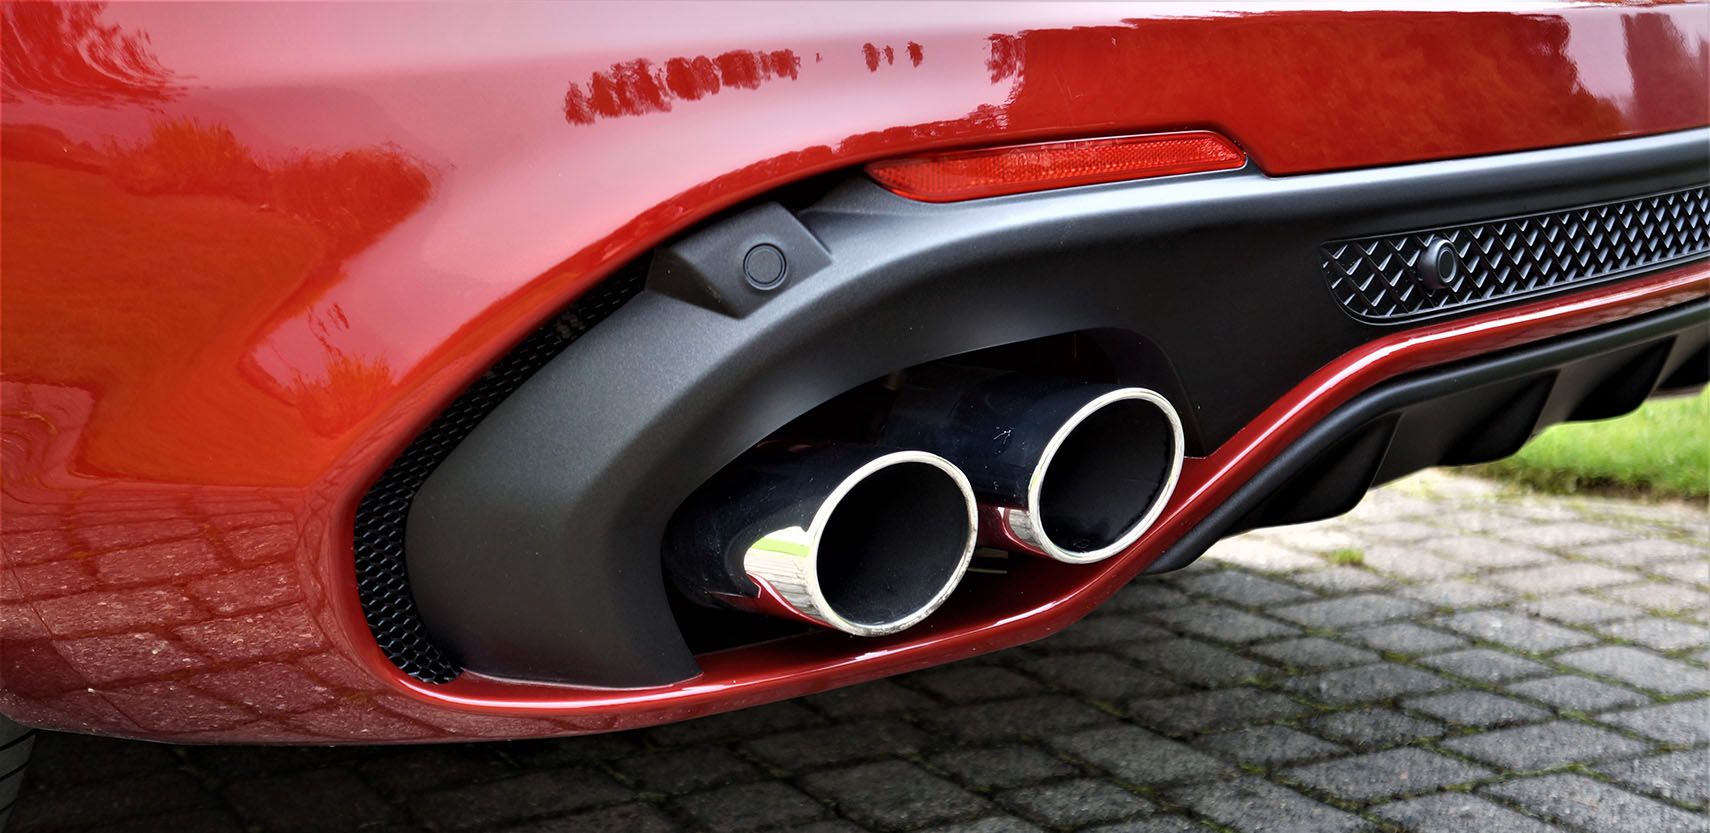 The quad exhaust sounds even better than it looks.